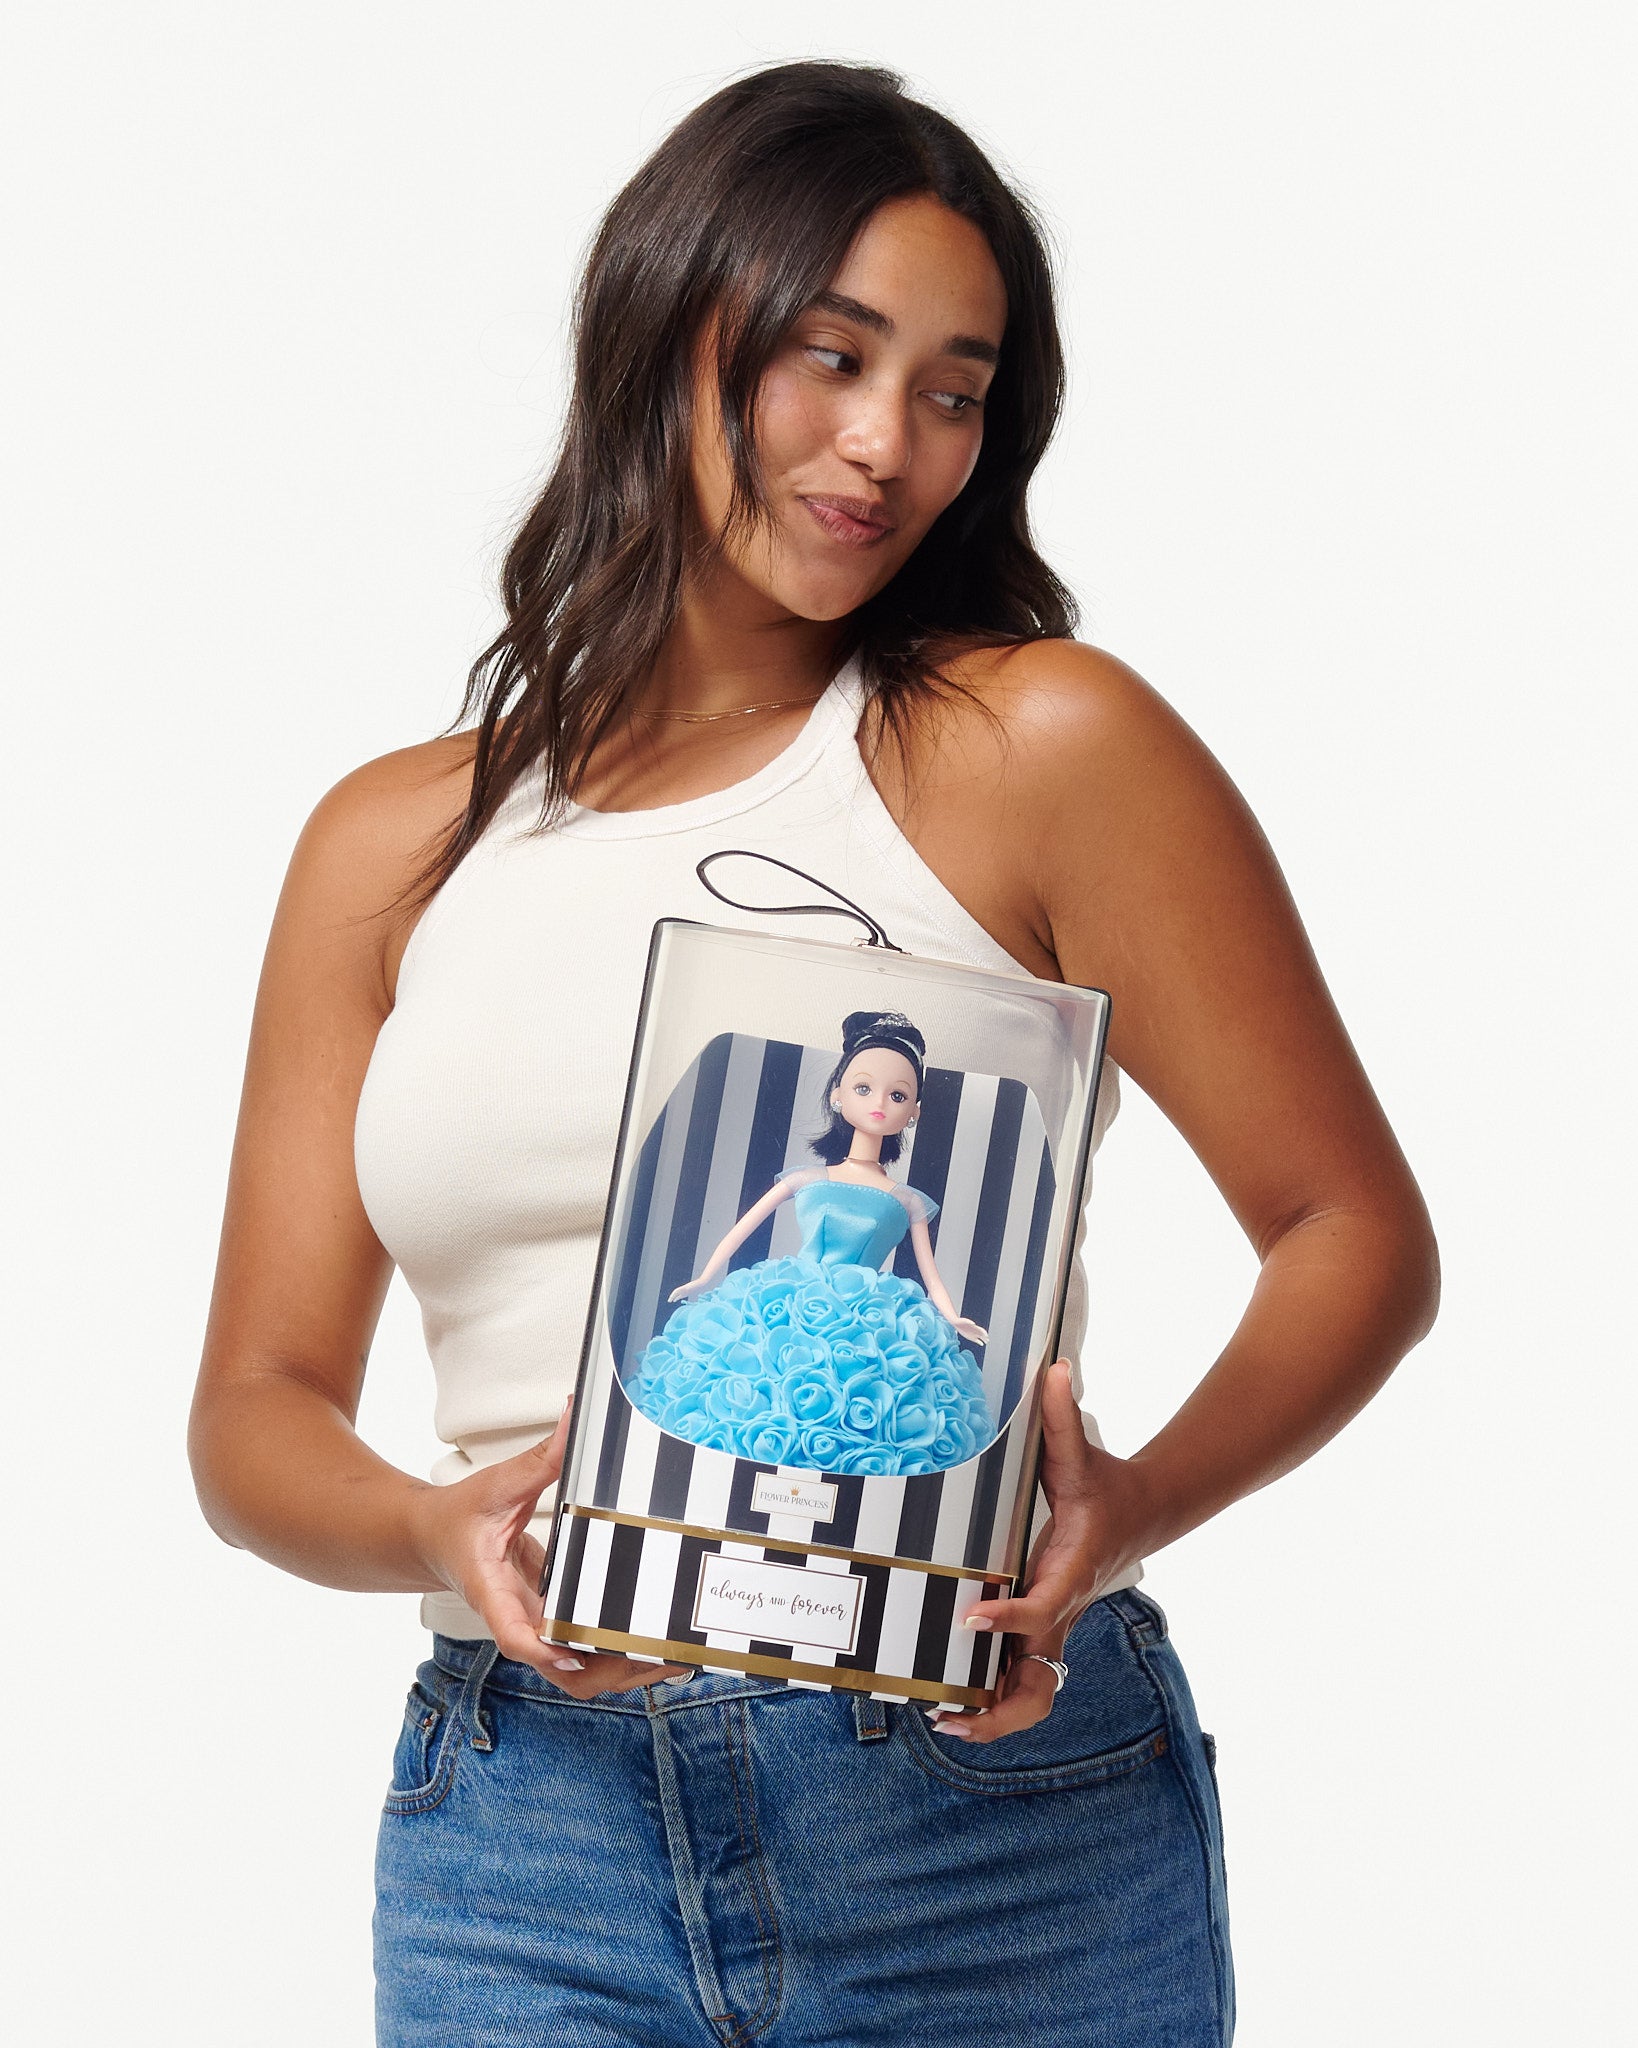 A woman is pictured holding a boxed doll. The doll within the packaging is styled with black hair, green eyes, and is dressed in a blue rose-adorned gown. The box displays black and white stripes, a gold trim, and a black ribbon with the text "forever always" on the top. The woman is casually dressed in a white tank top and blue jeans.